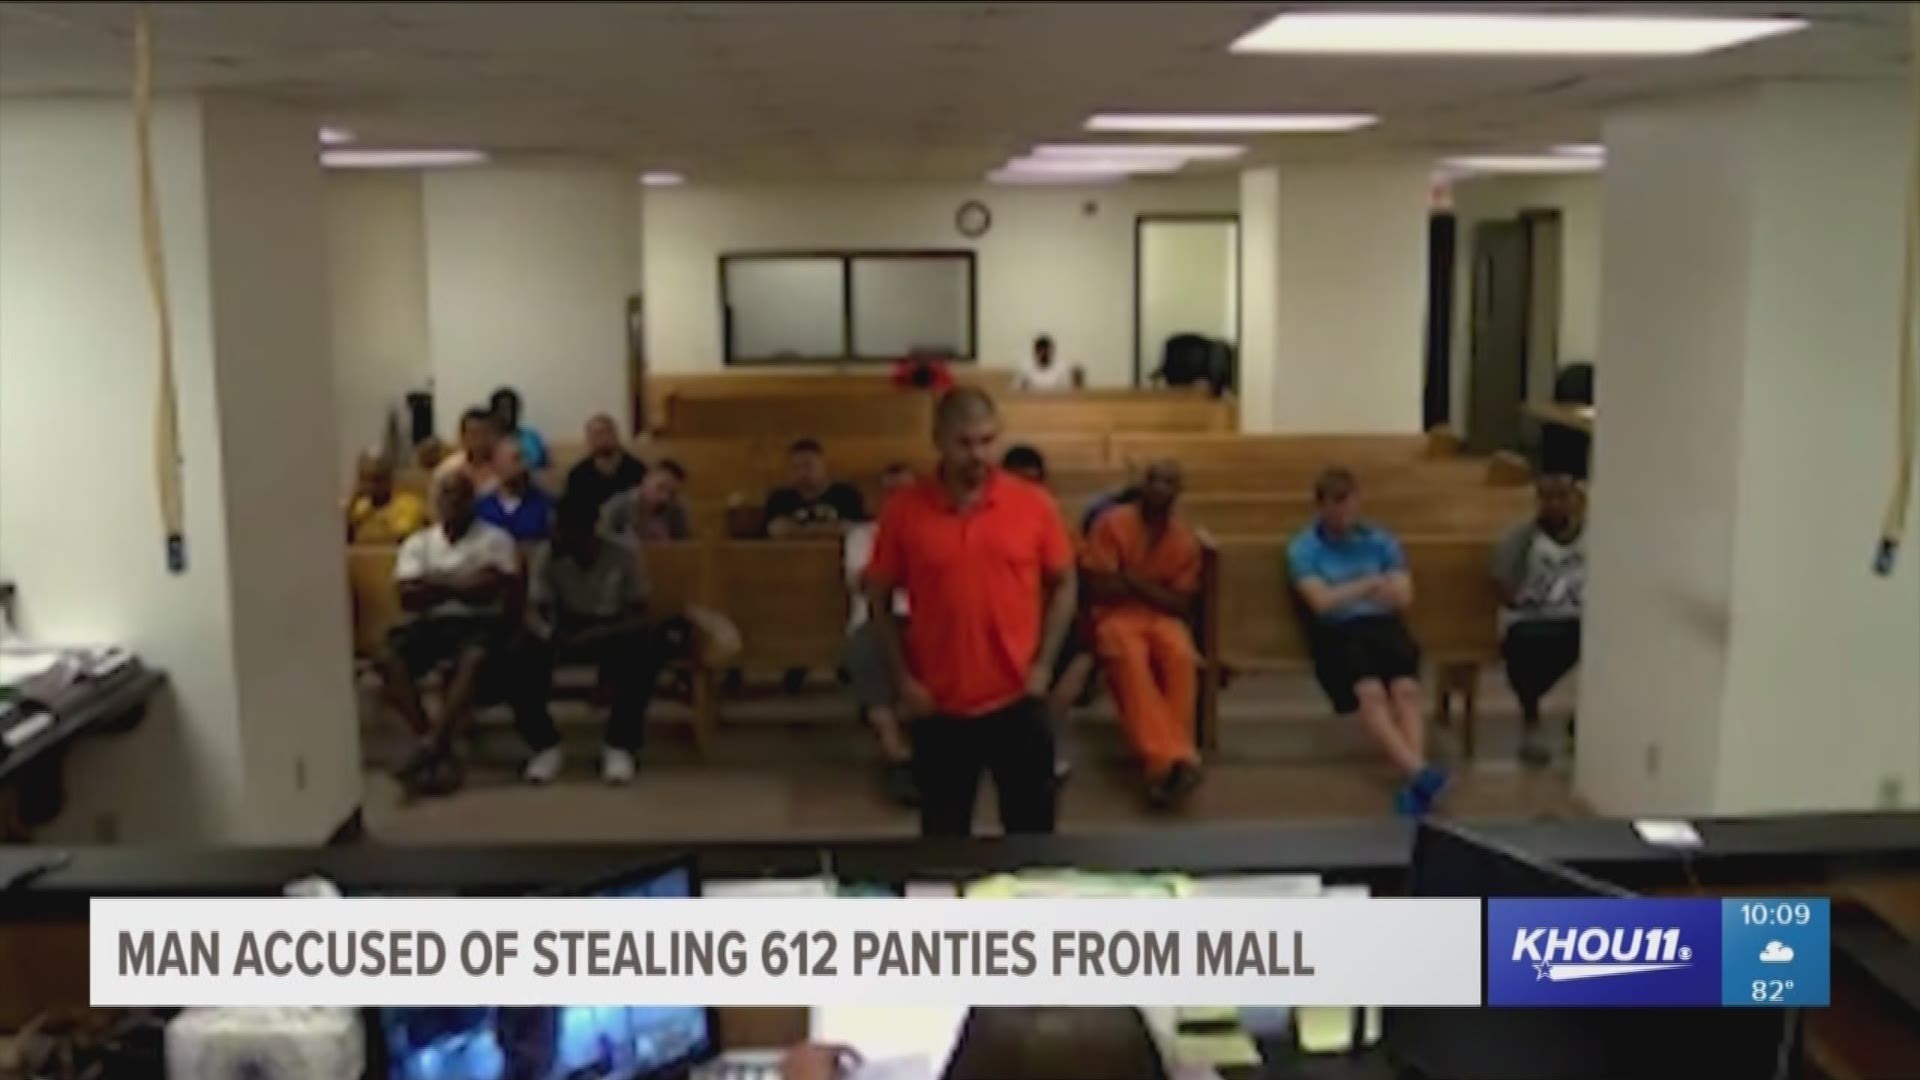 Man Accused Of Stealing 612 Panties From Mall